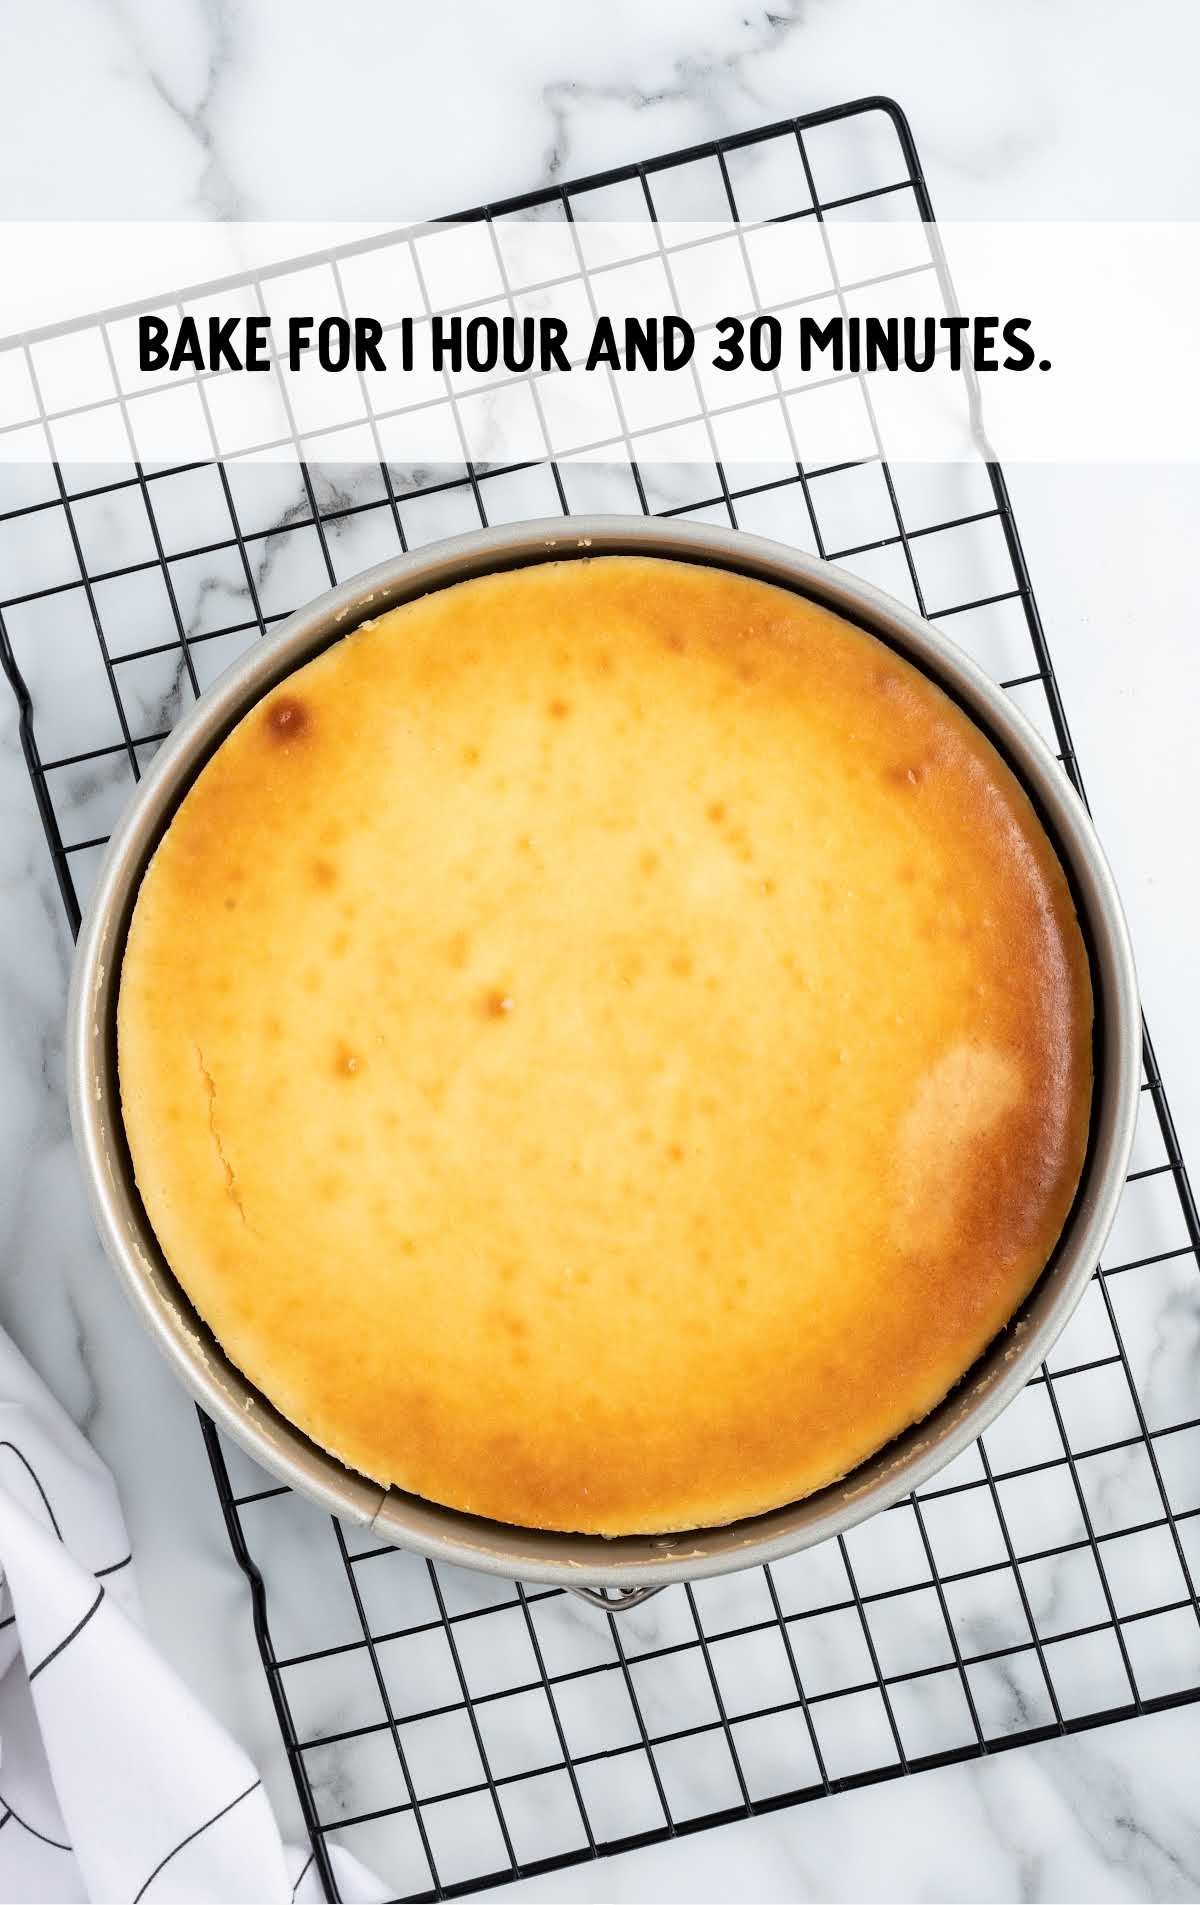 bake cheesecake for 1 hour and 30 minutes